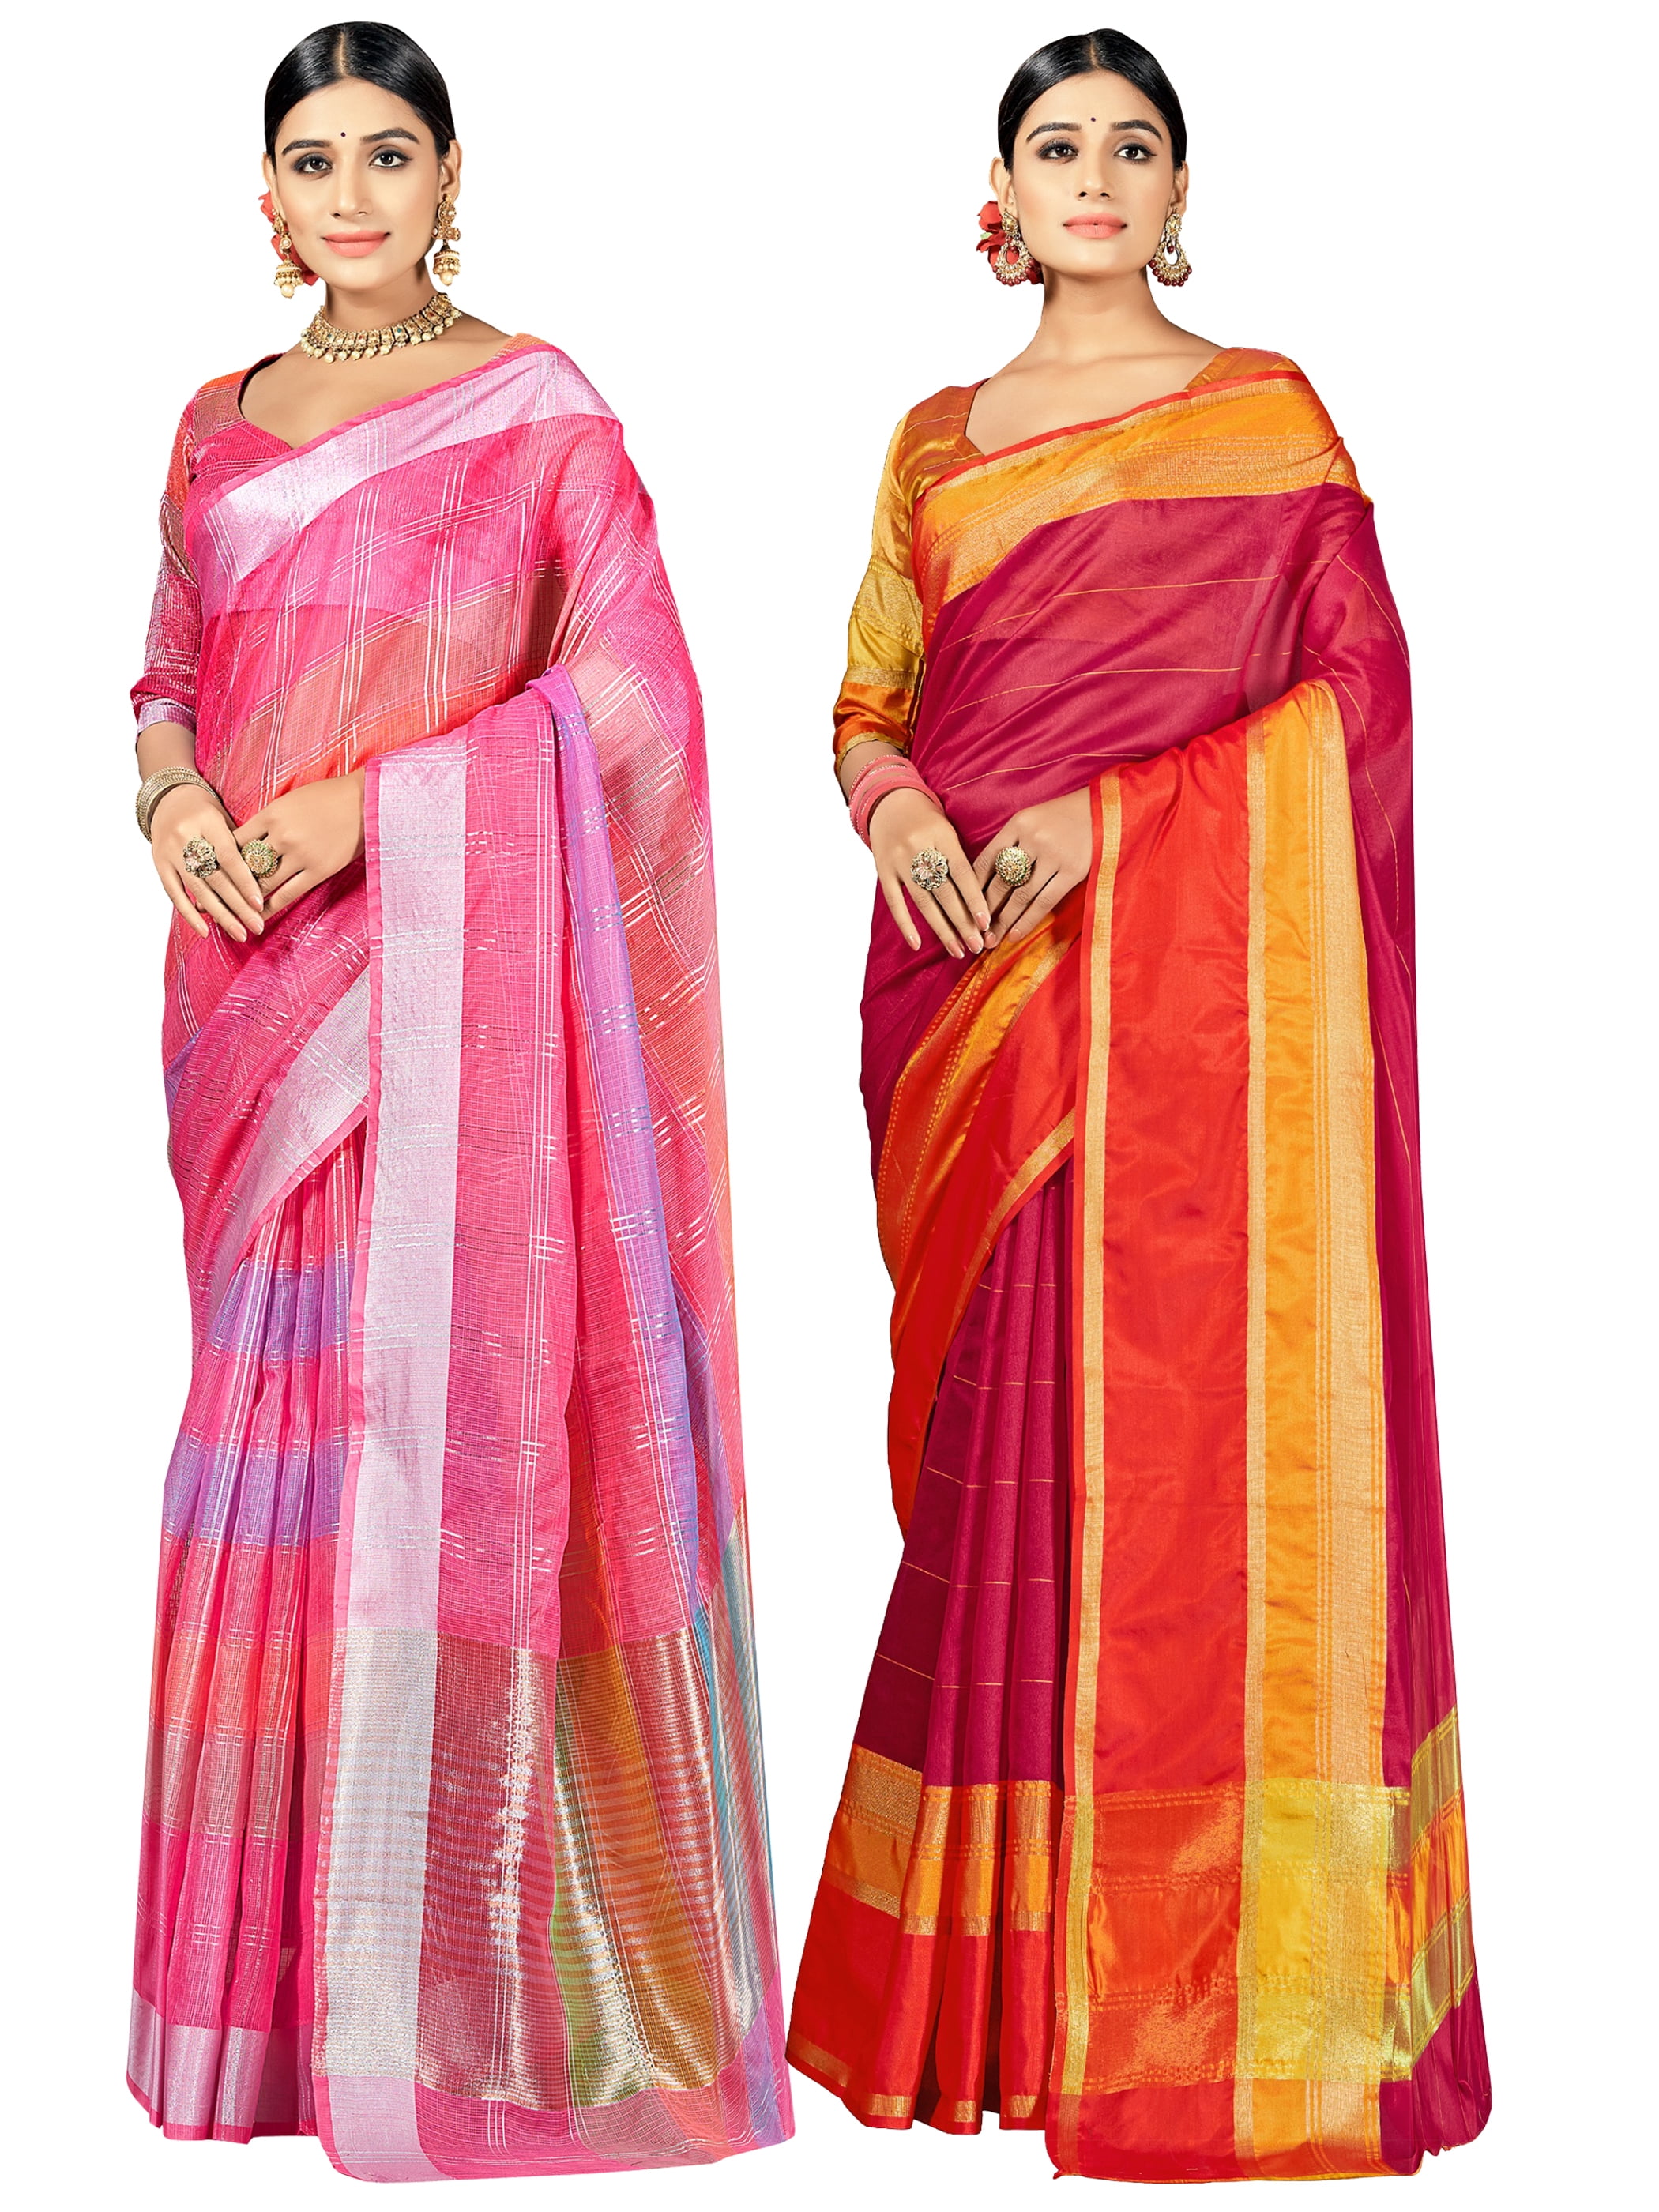 Diwali Special Sarees Collection At Best Price - Stylecaret.com